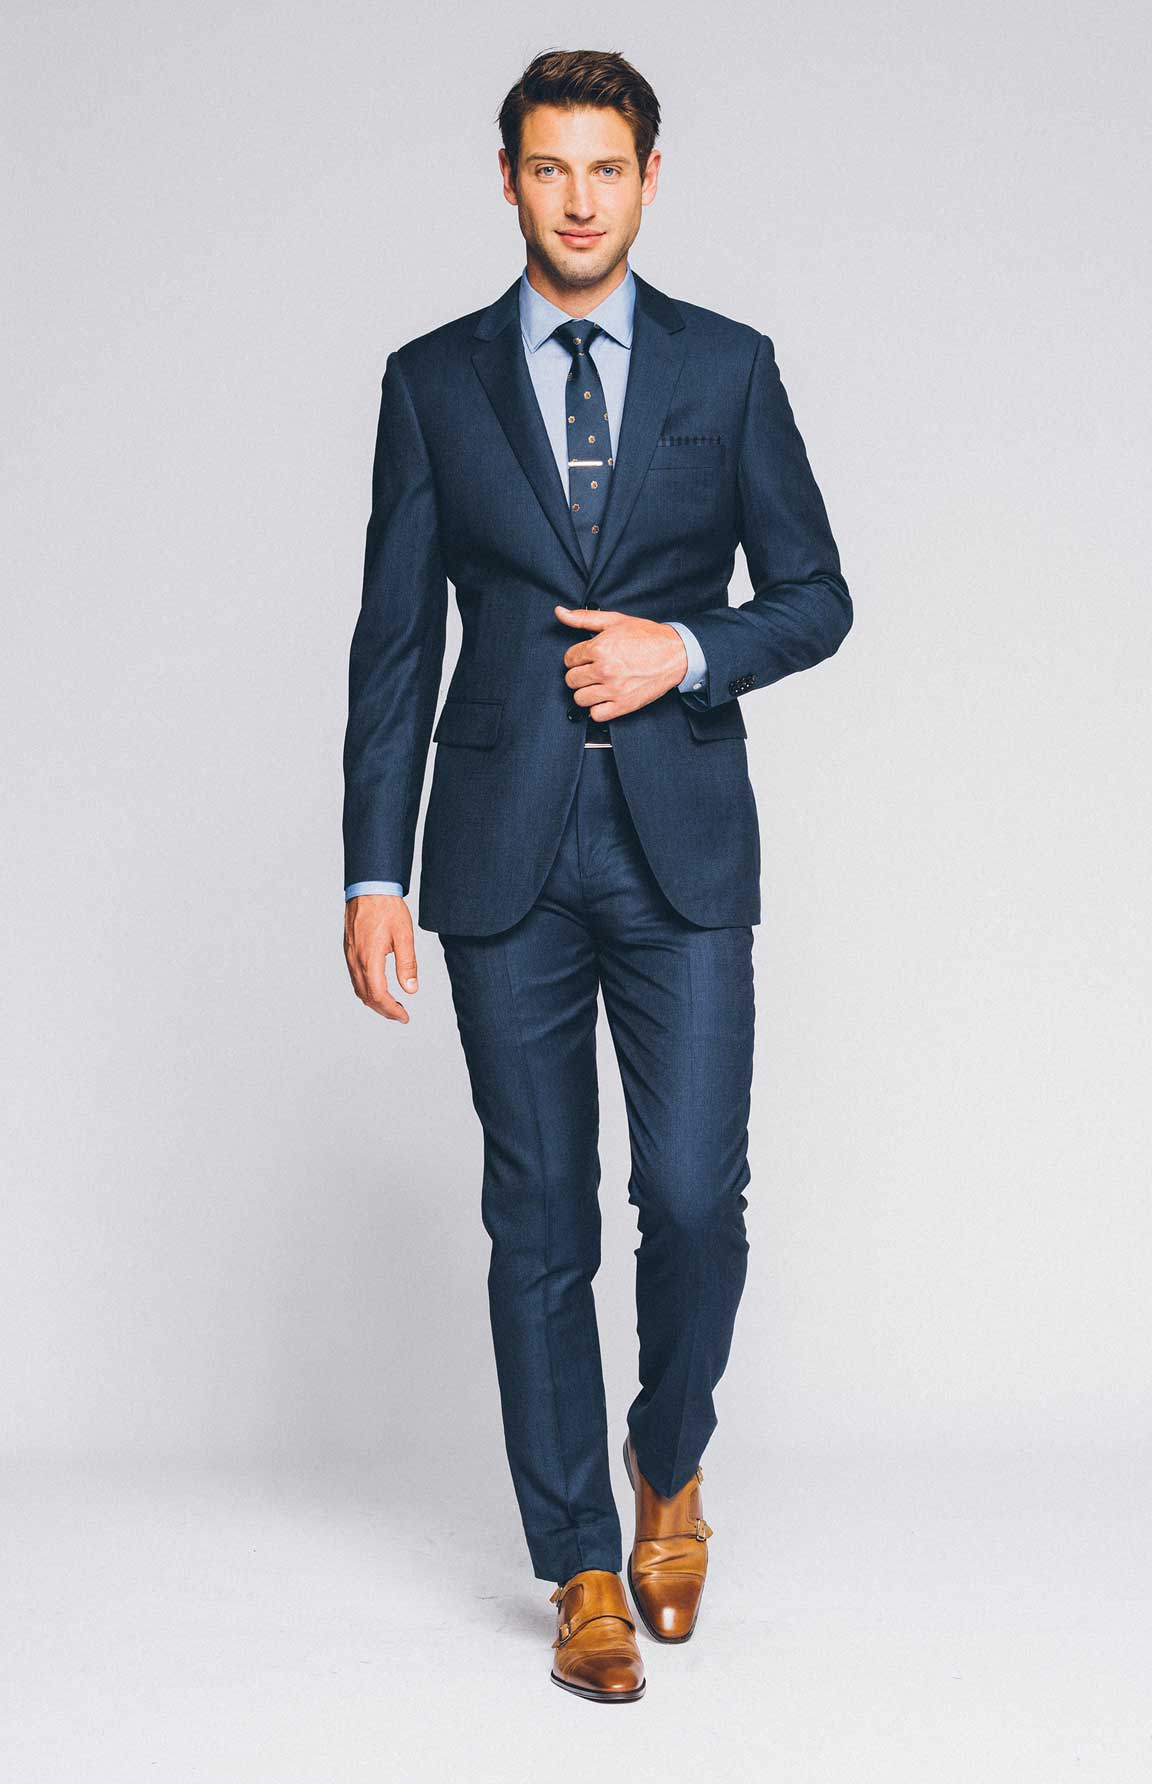 The formal dinner date option—you can’t go wrong in a tailored suit.